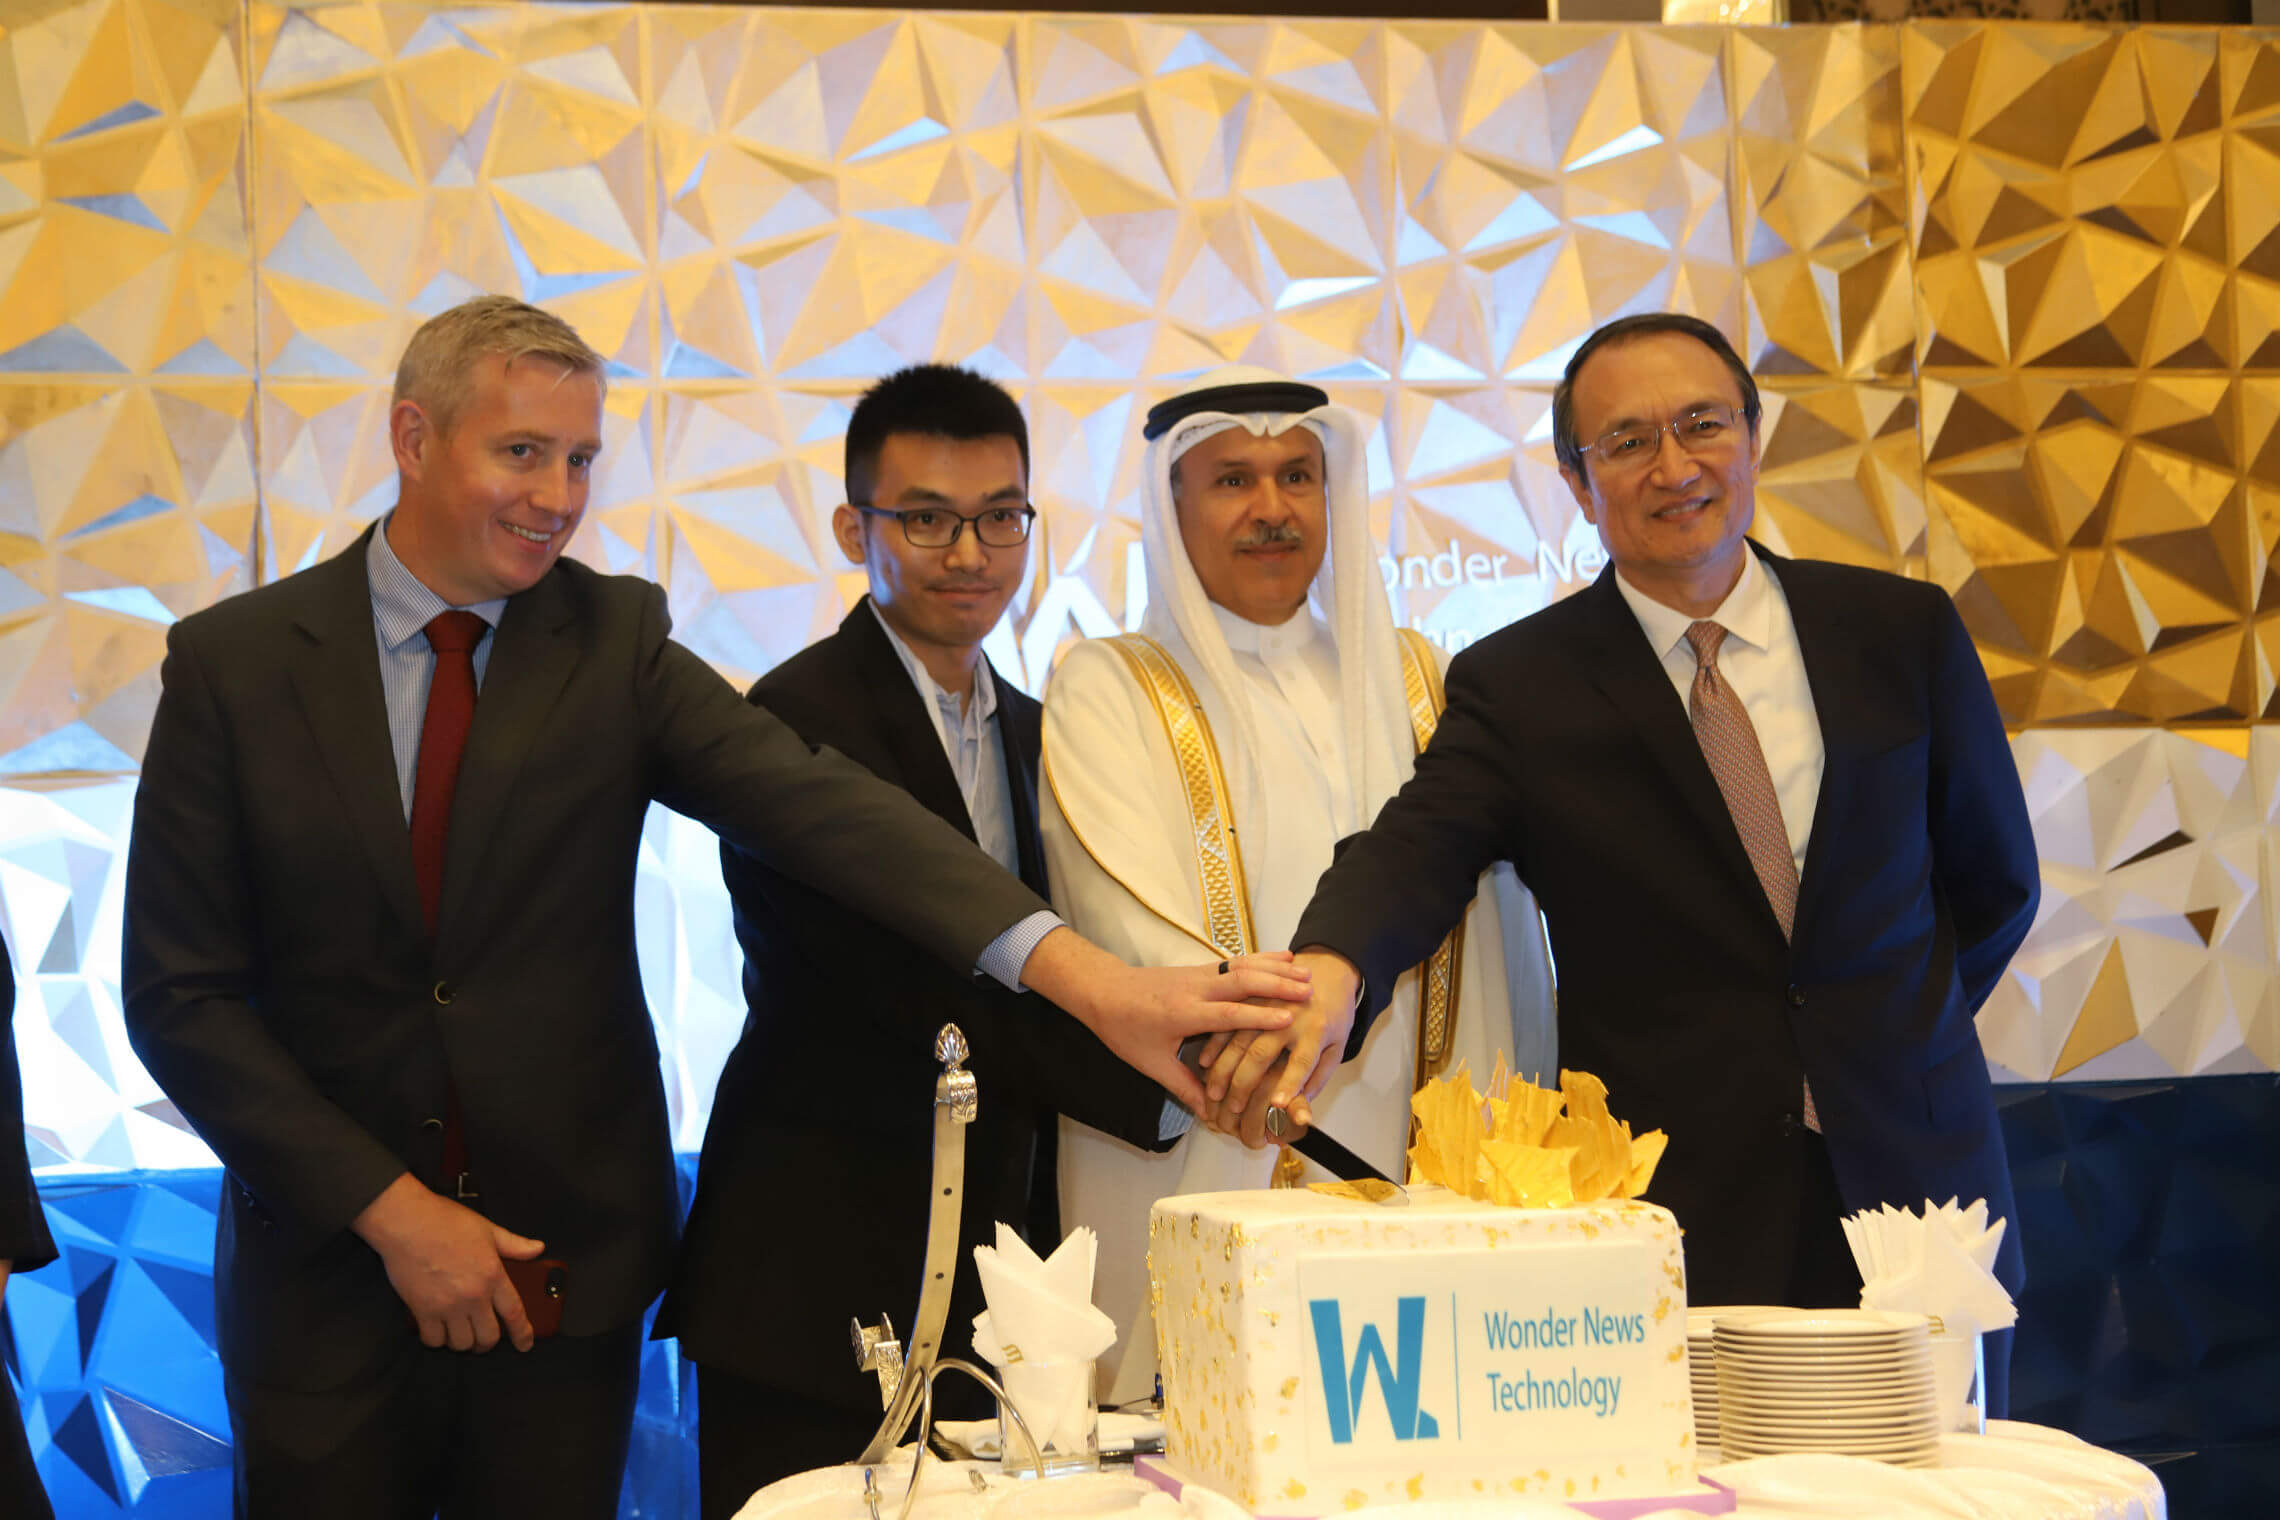 Wonder News officially launches regional headquarters in Kingdom of Bahrain